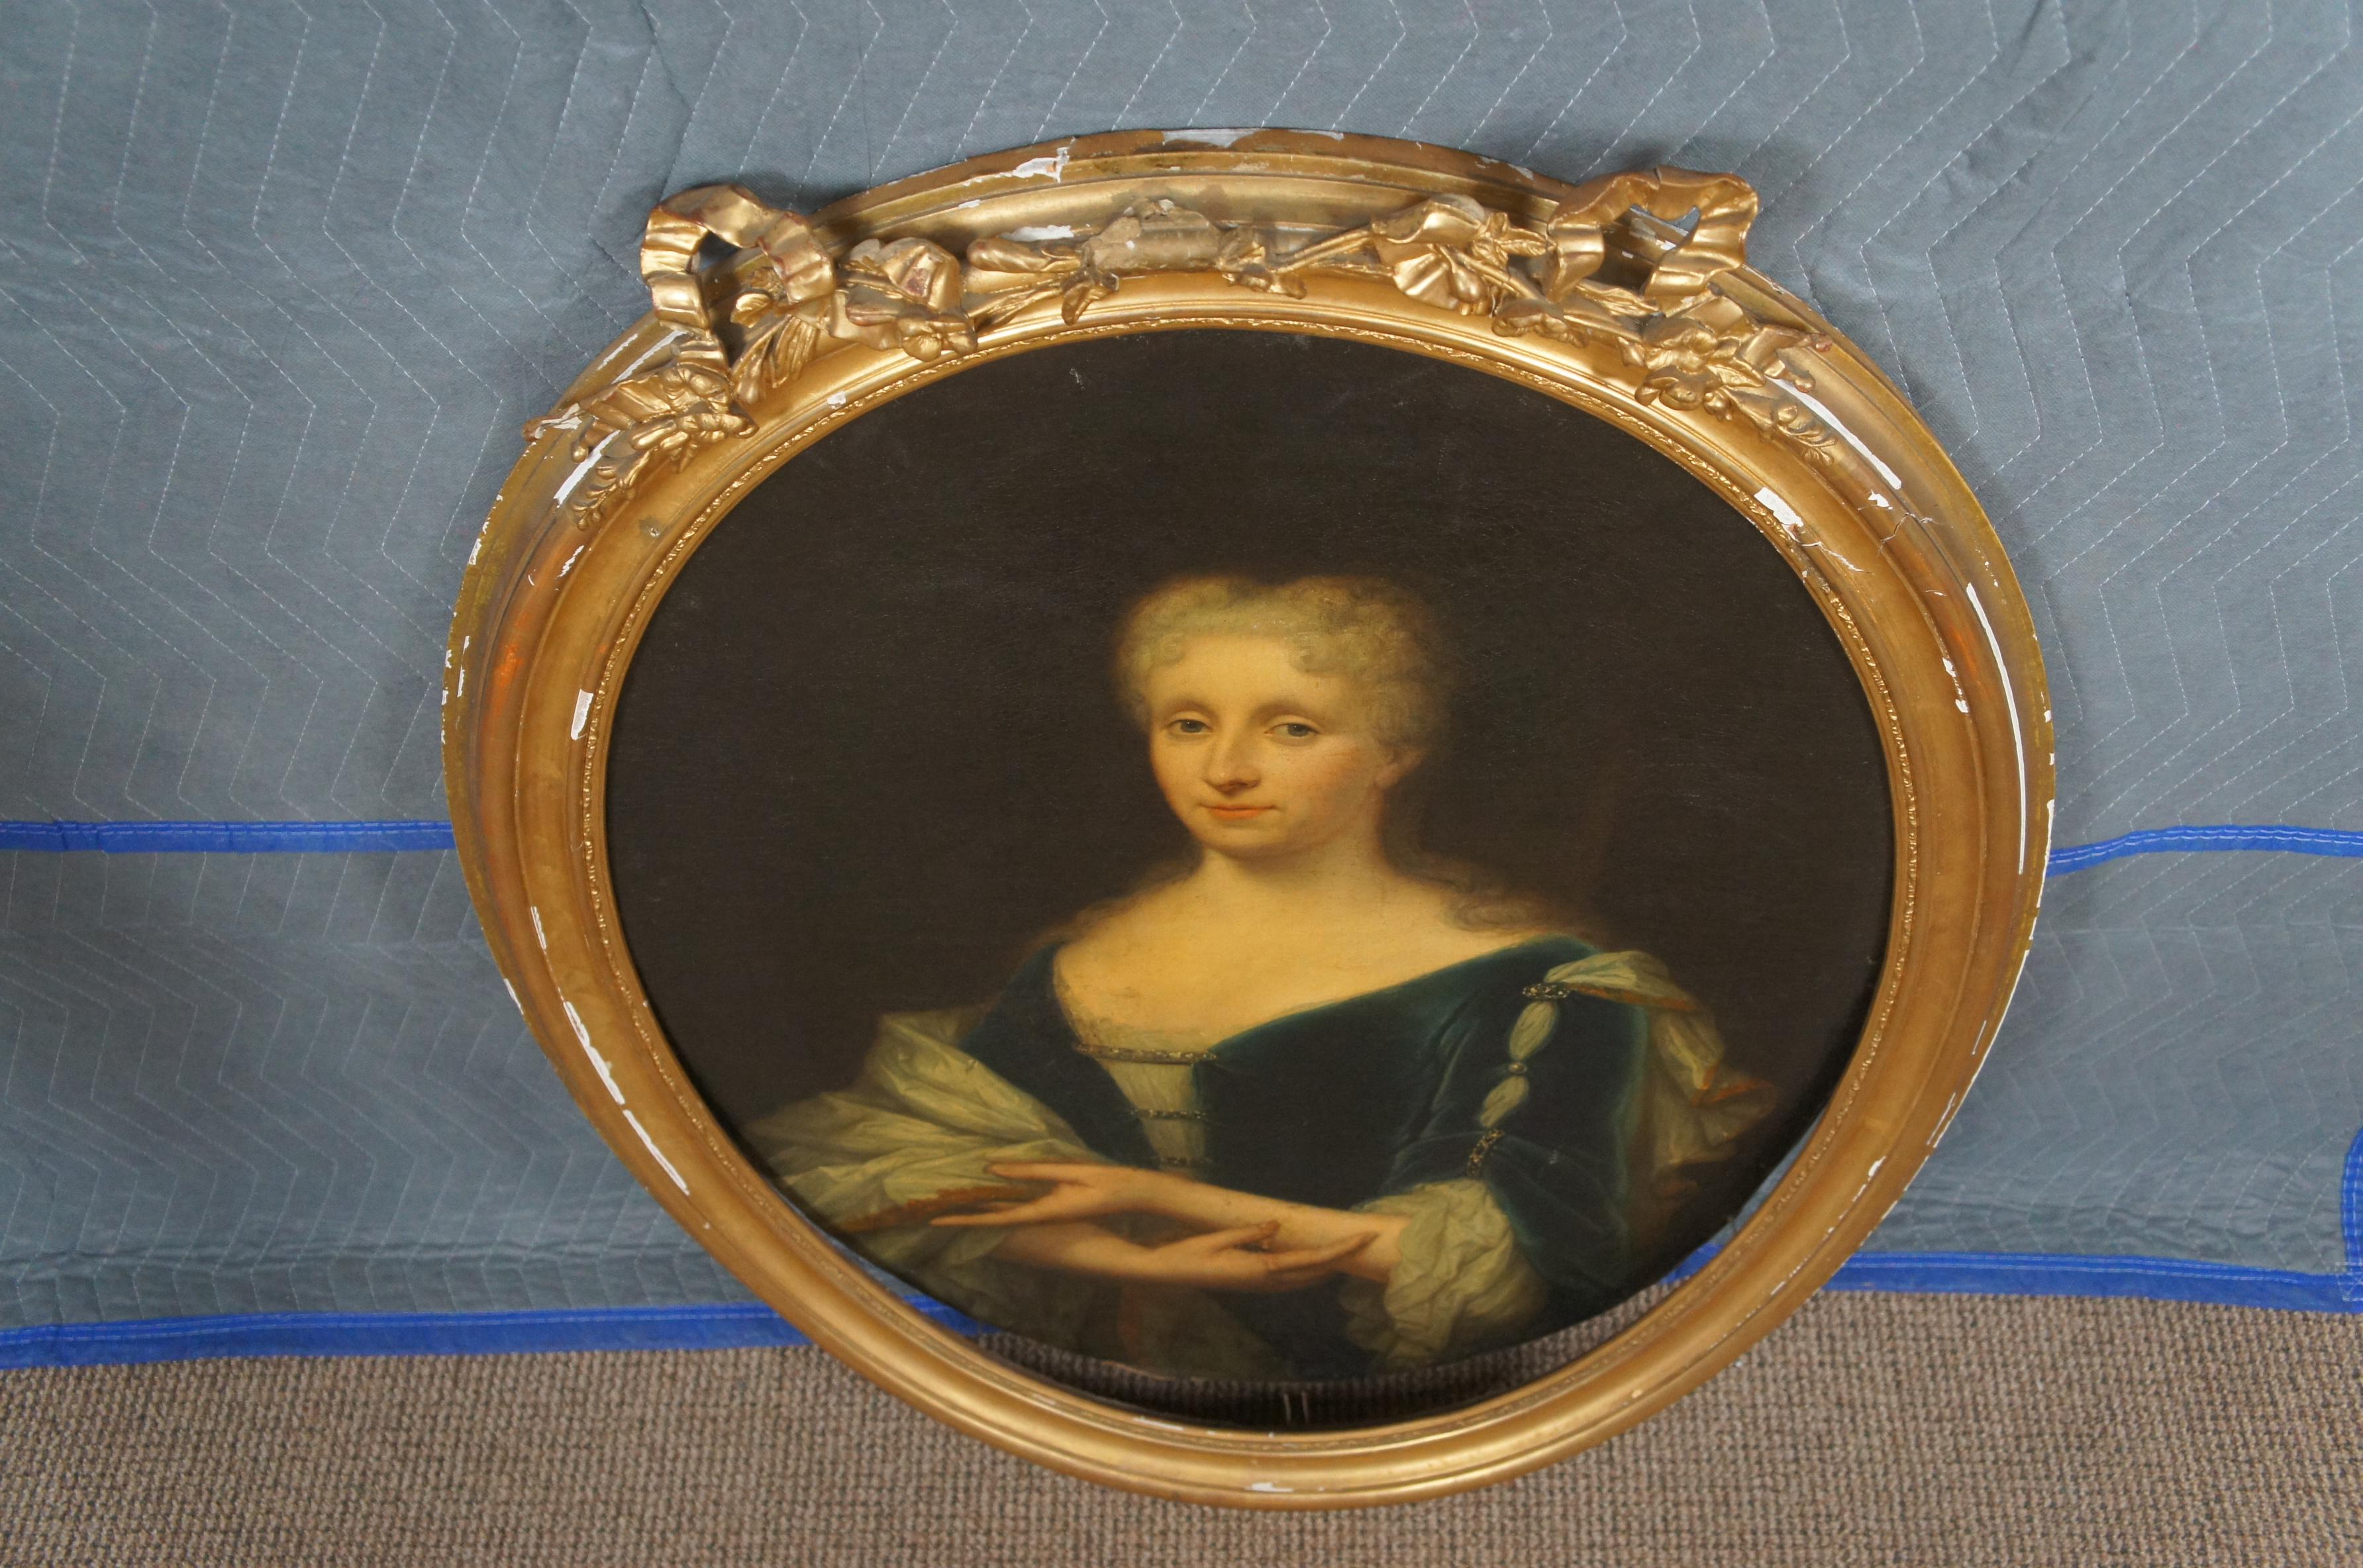 Antique 18th Century Dutch Oil Painting on Canvas Oval Portrait Seated Woman In Good Condition For Sale In Dayton, OH